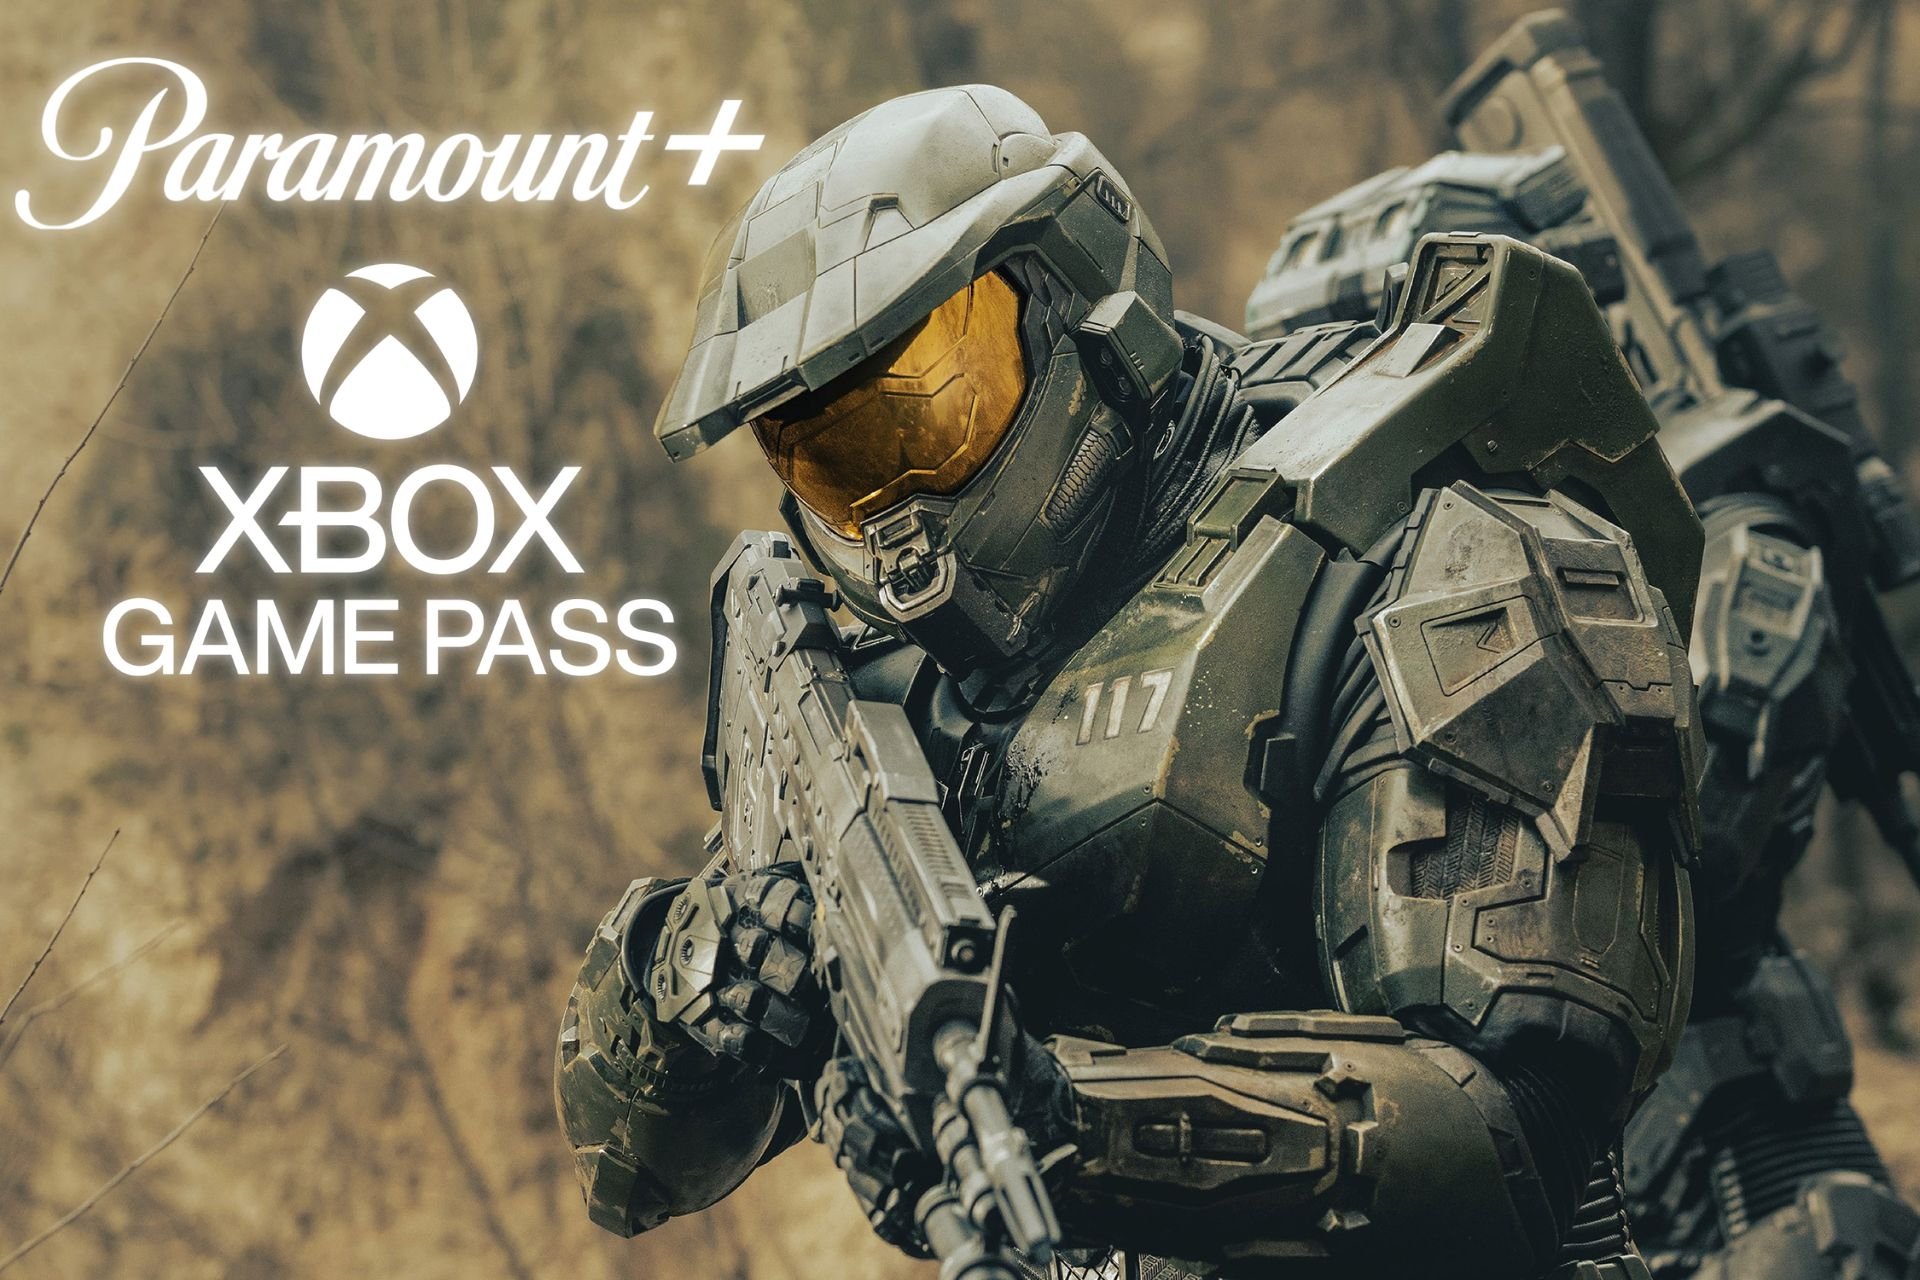 Halo TV Series featuring Xbox Game Pass and Paramount+